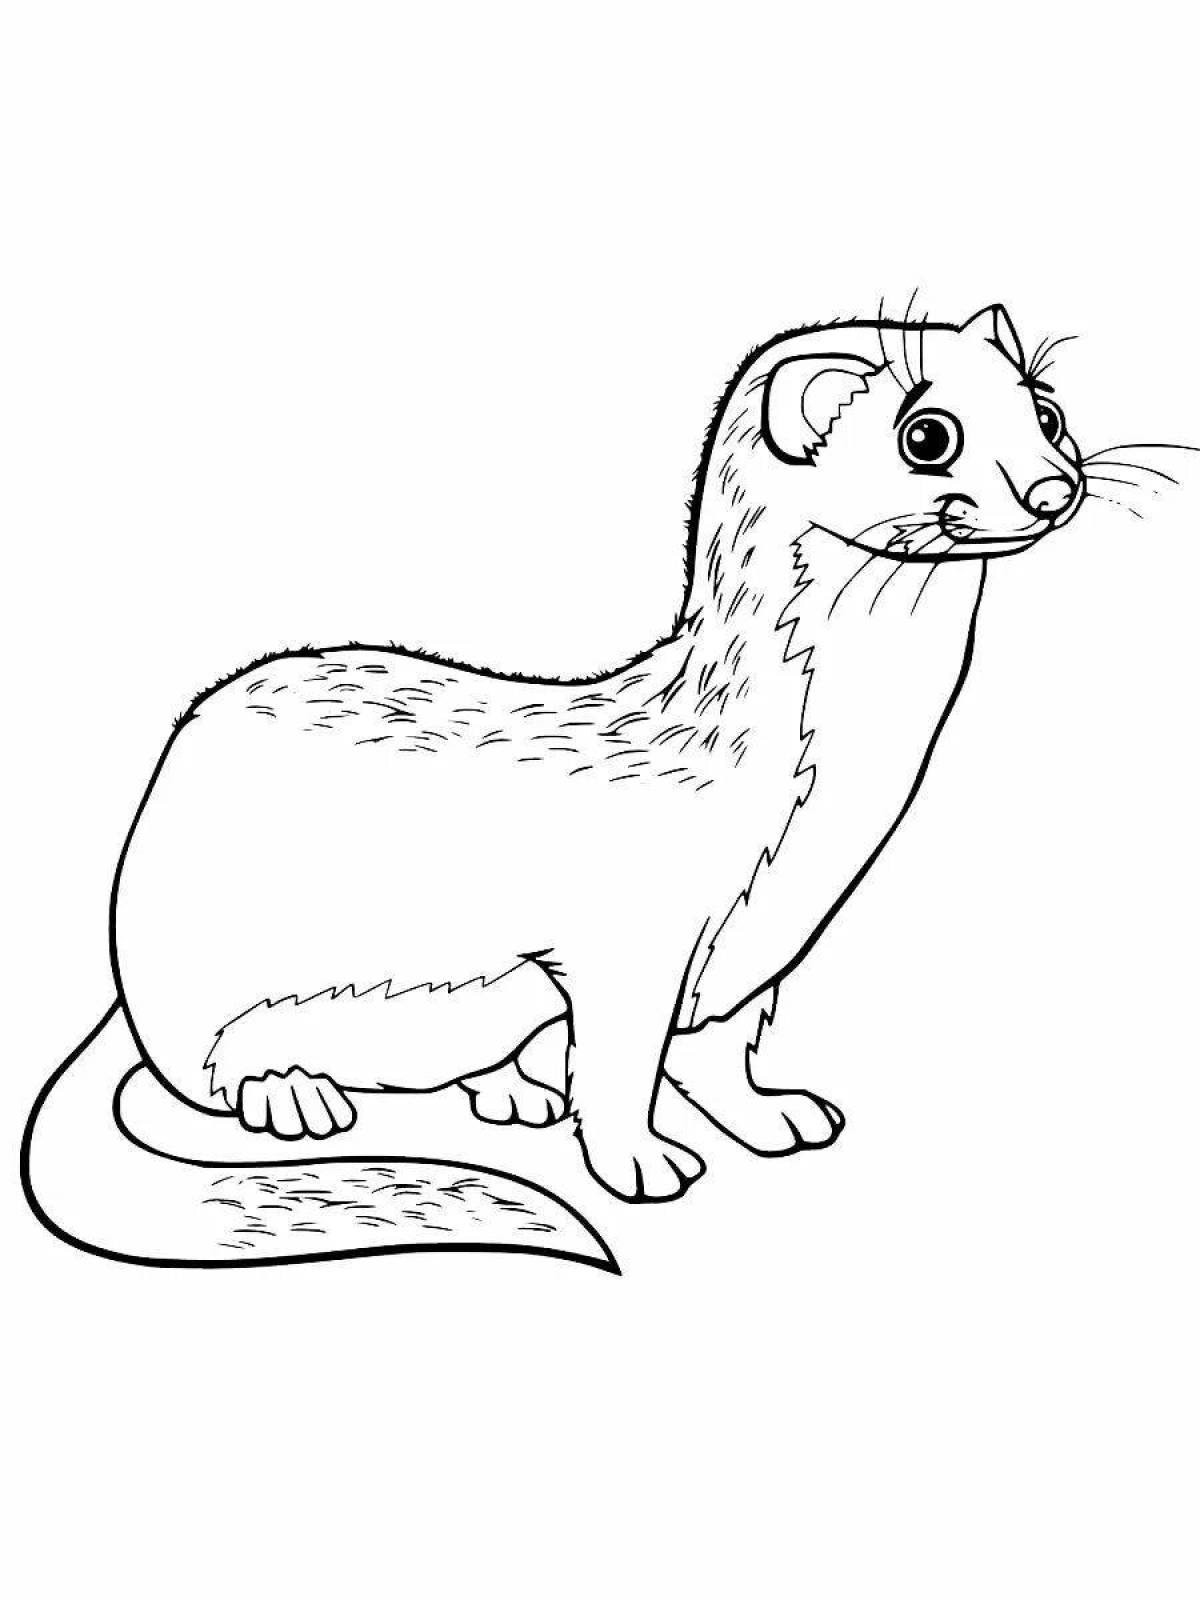 Adorable ferret coloring page for kids